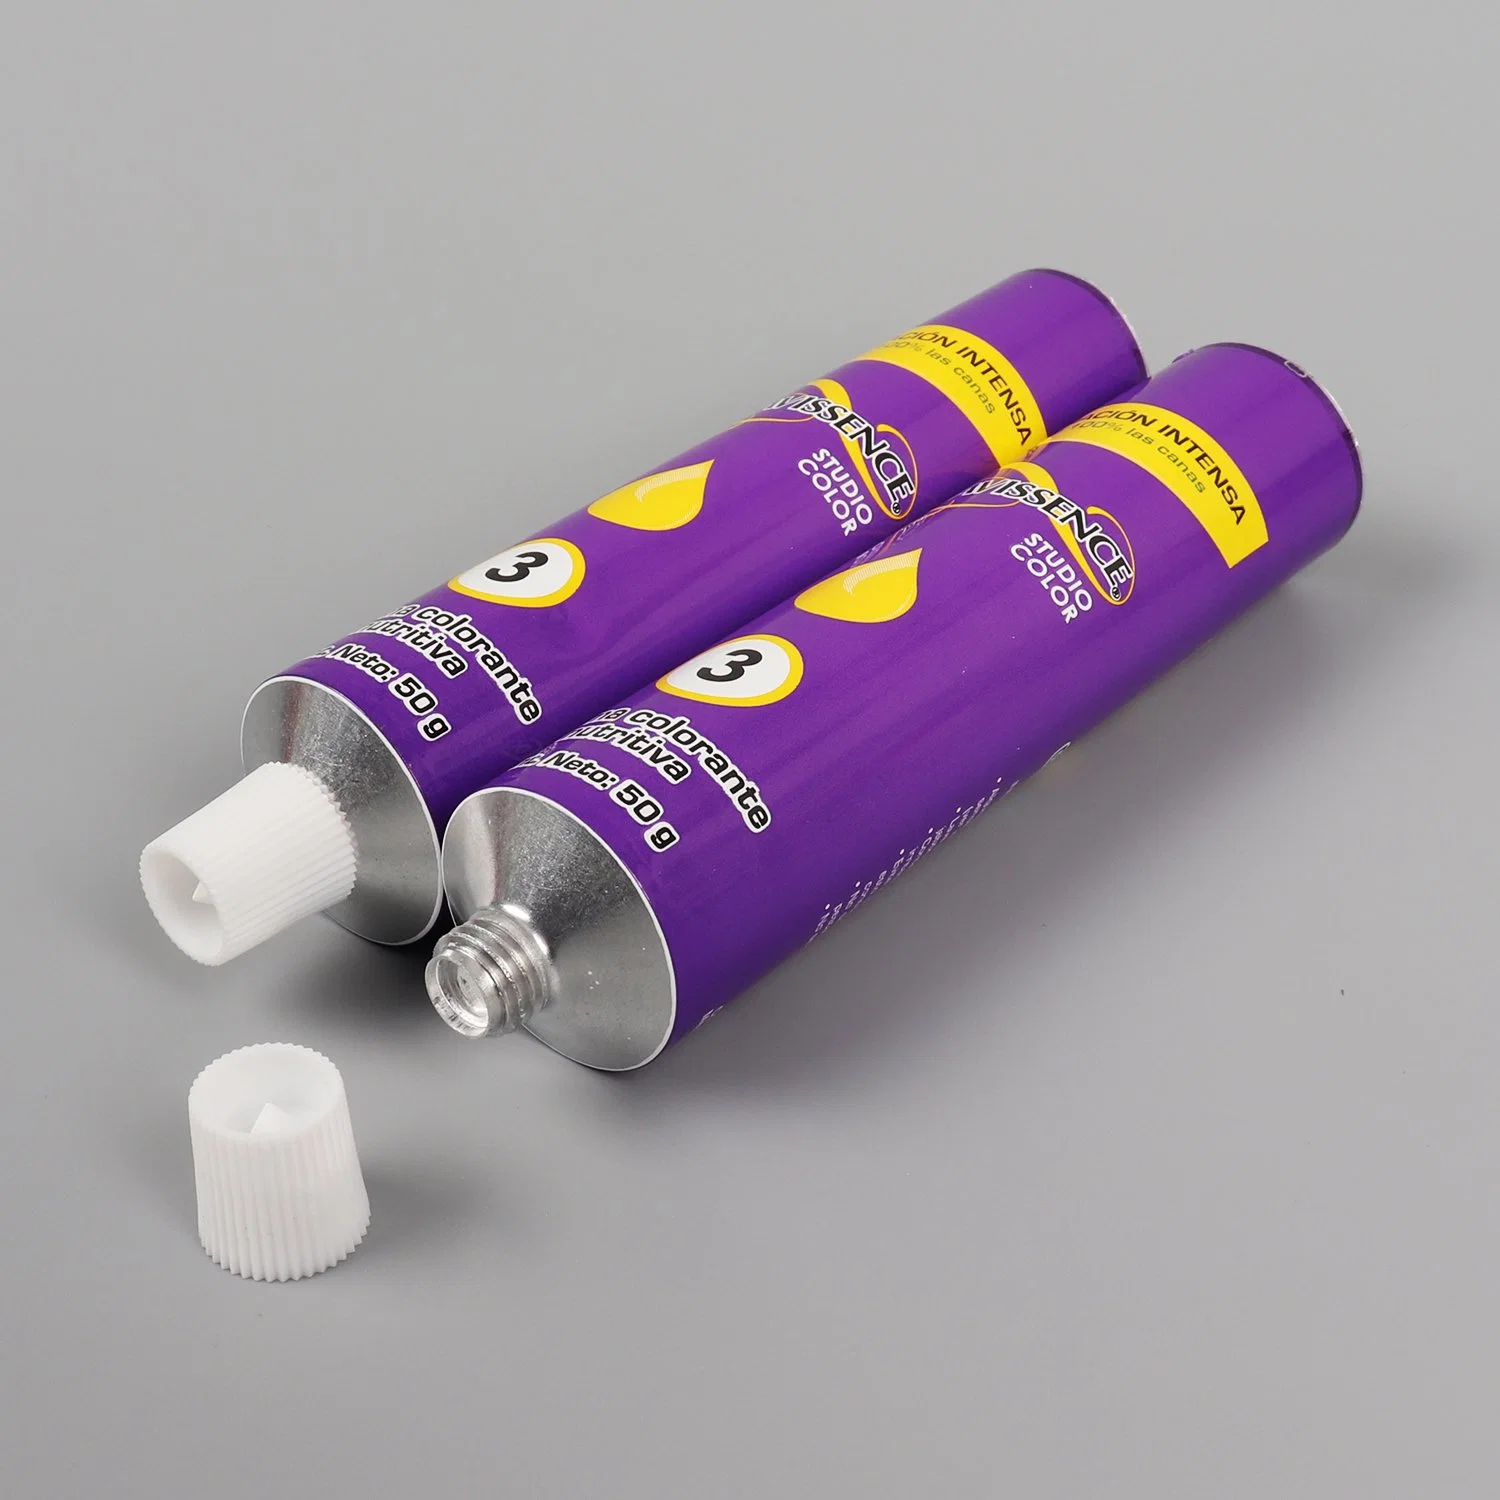 Collapsible Aluminum Hair Color, Glue, Cream Packaging Tube